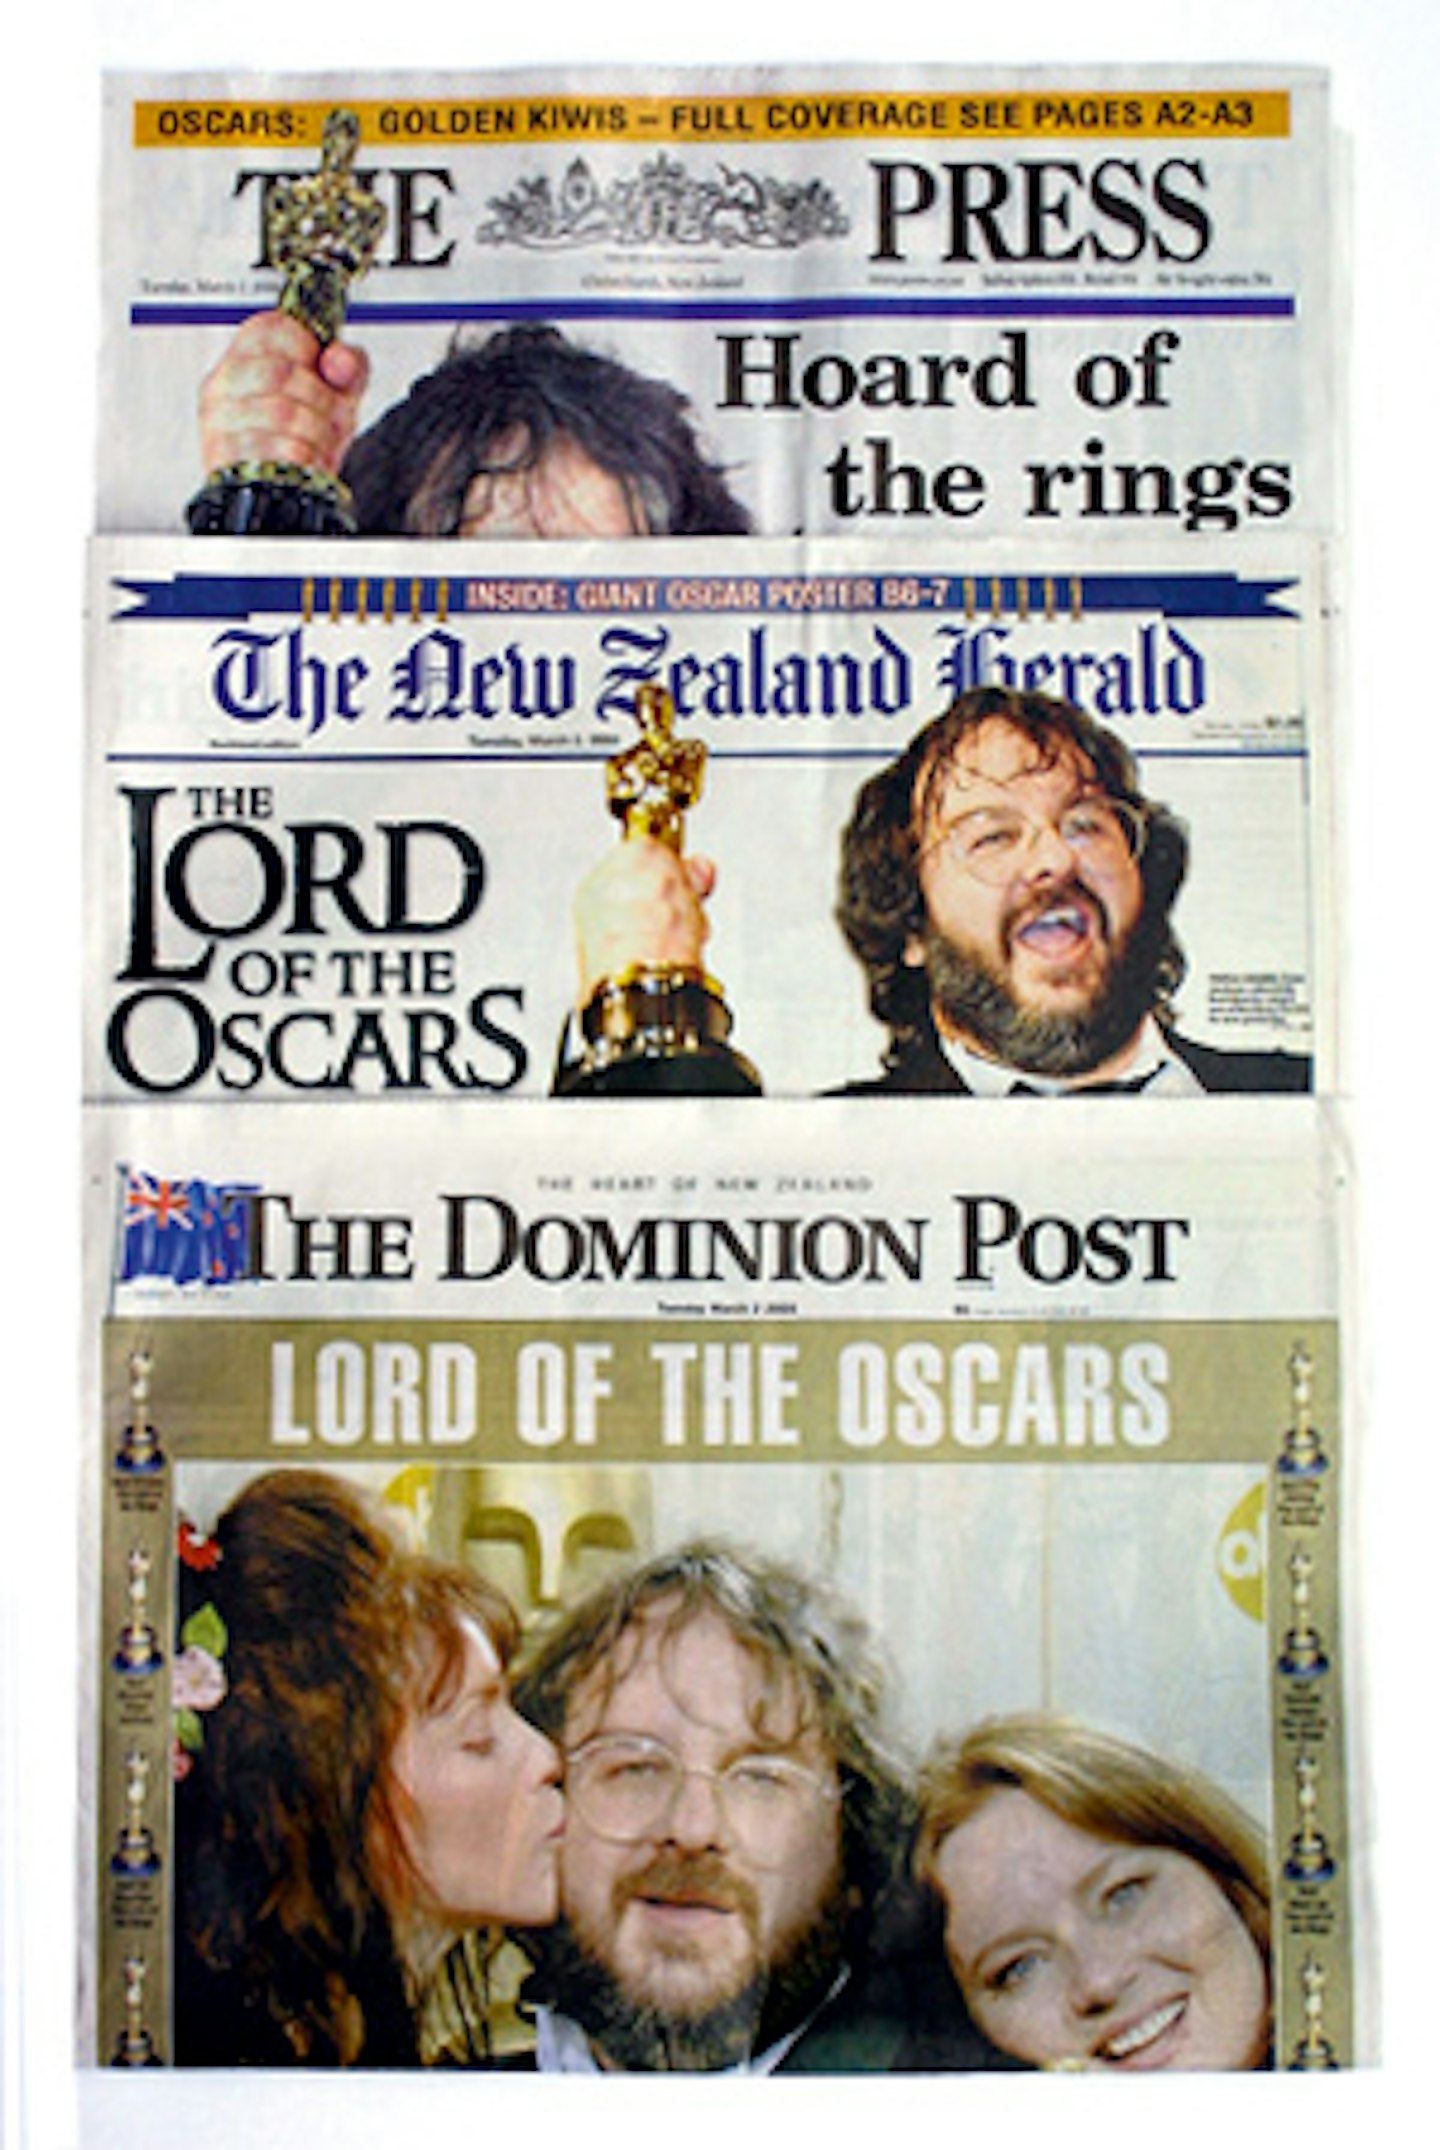 Lord of the Rings Wins 11 Oscars - The Declaration